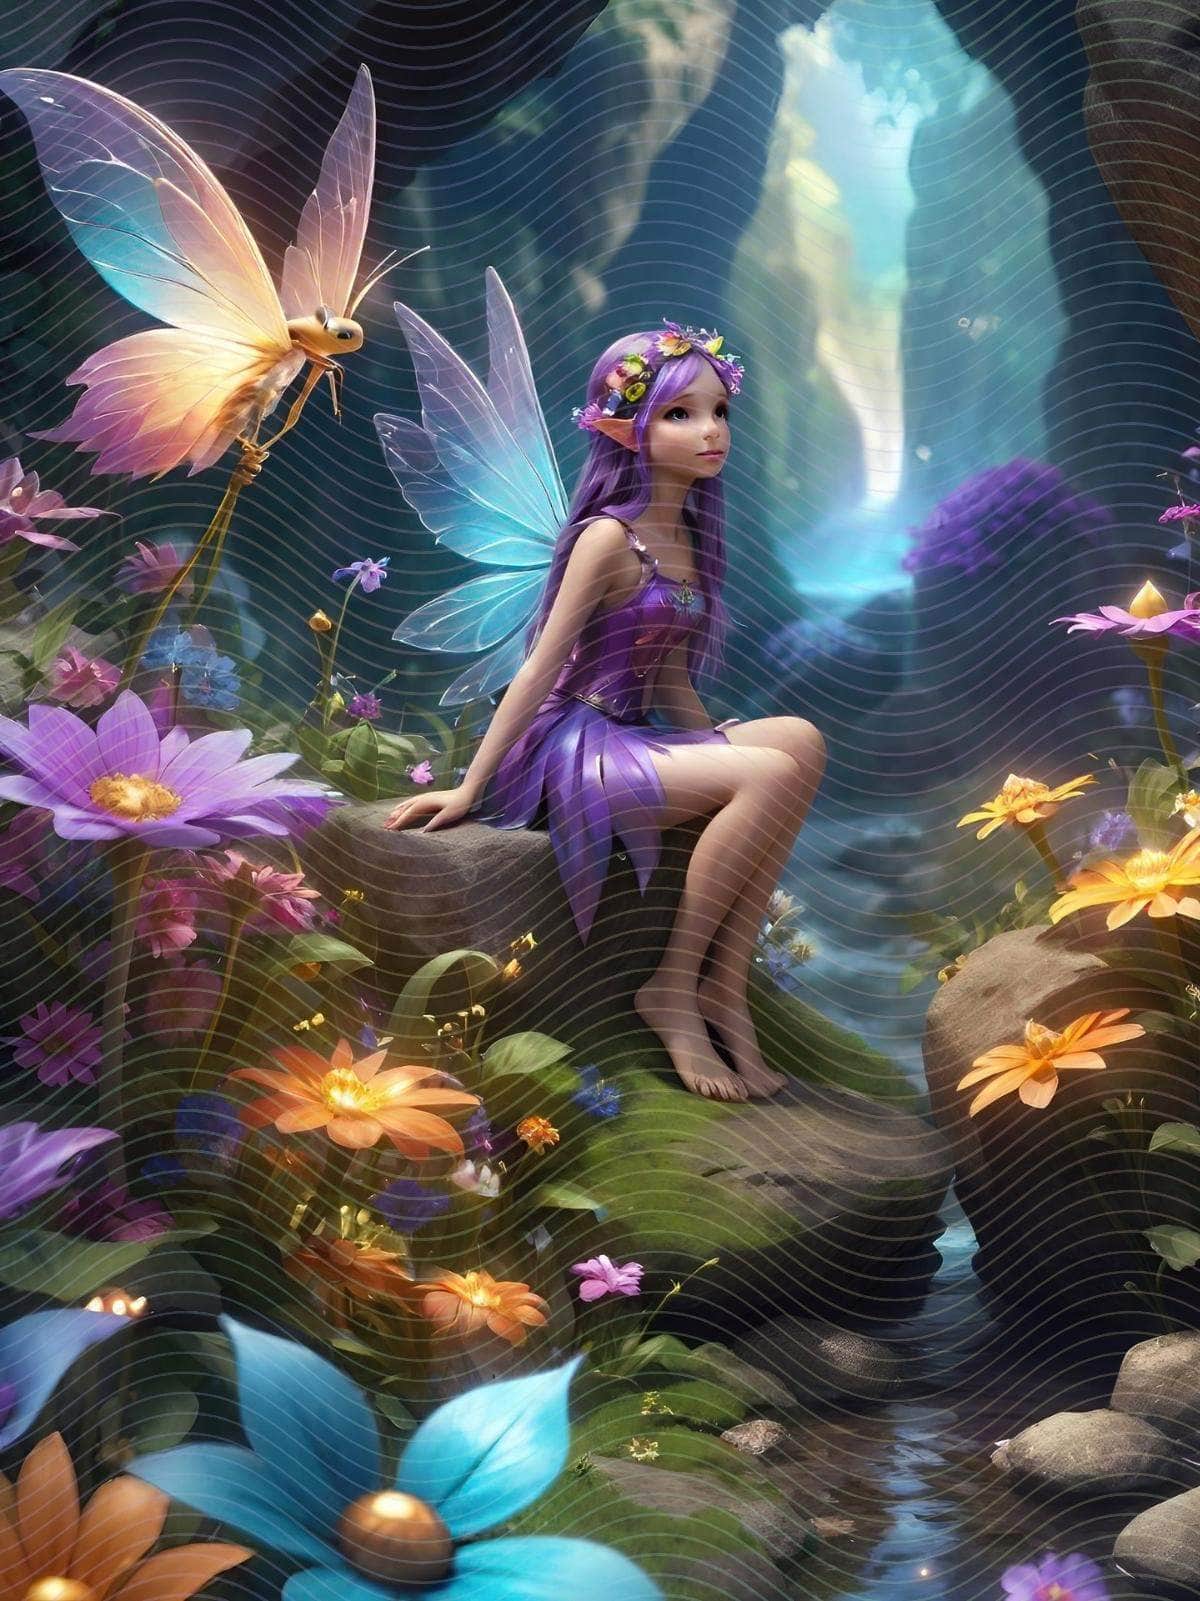 A Fairy Sitting on a Rock Surrounded by Flowers